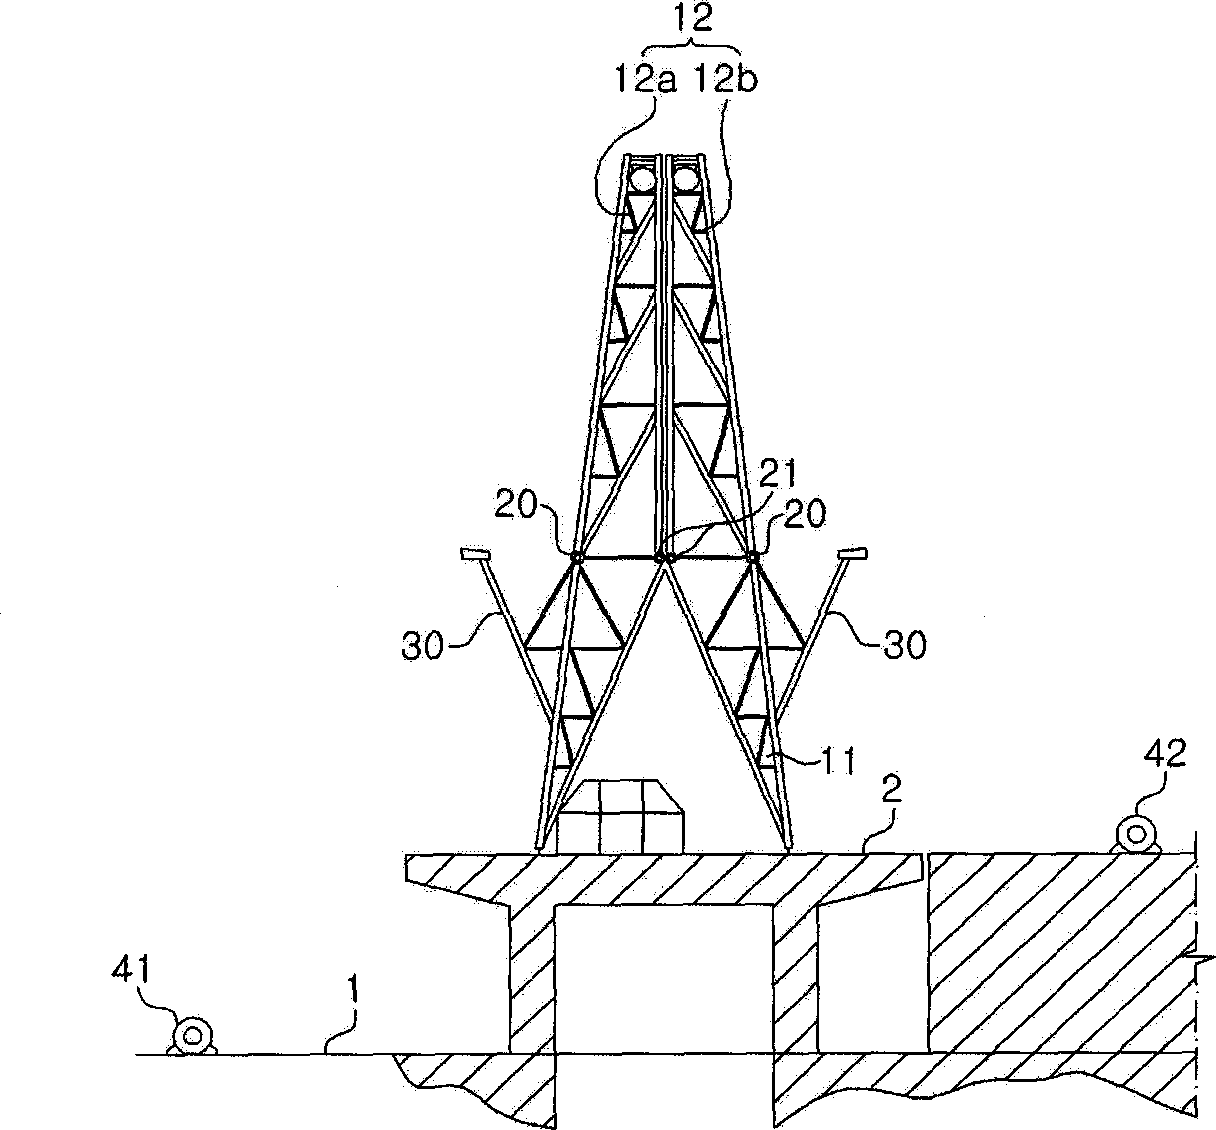 Foldable derrick structure for a ship